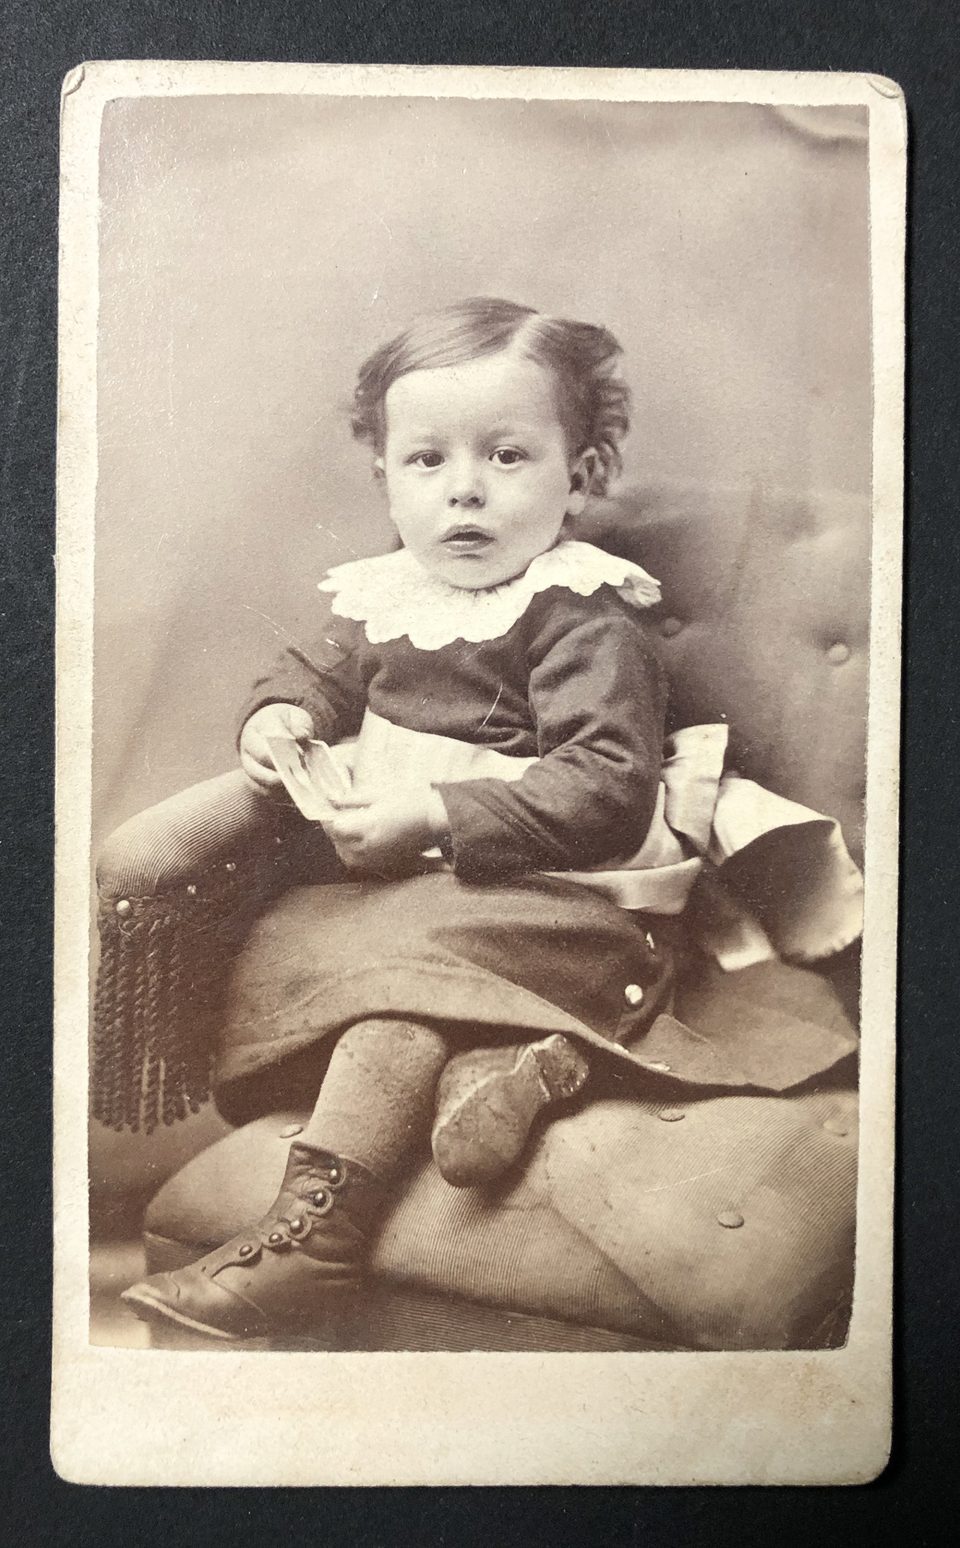 Portrait of a young girl wearing a long dress, thick leggings, and high, button-up boots. She's holding a photograph in her tiny hands. Notice the nails in the heel of her right boot.